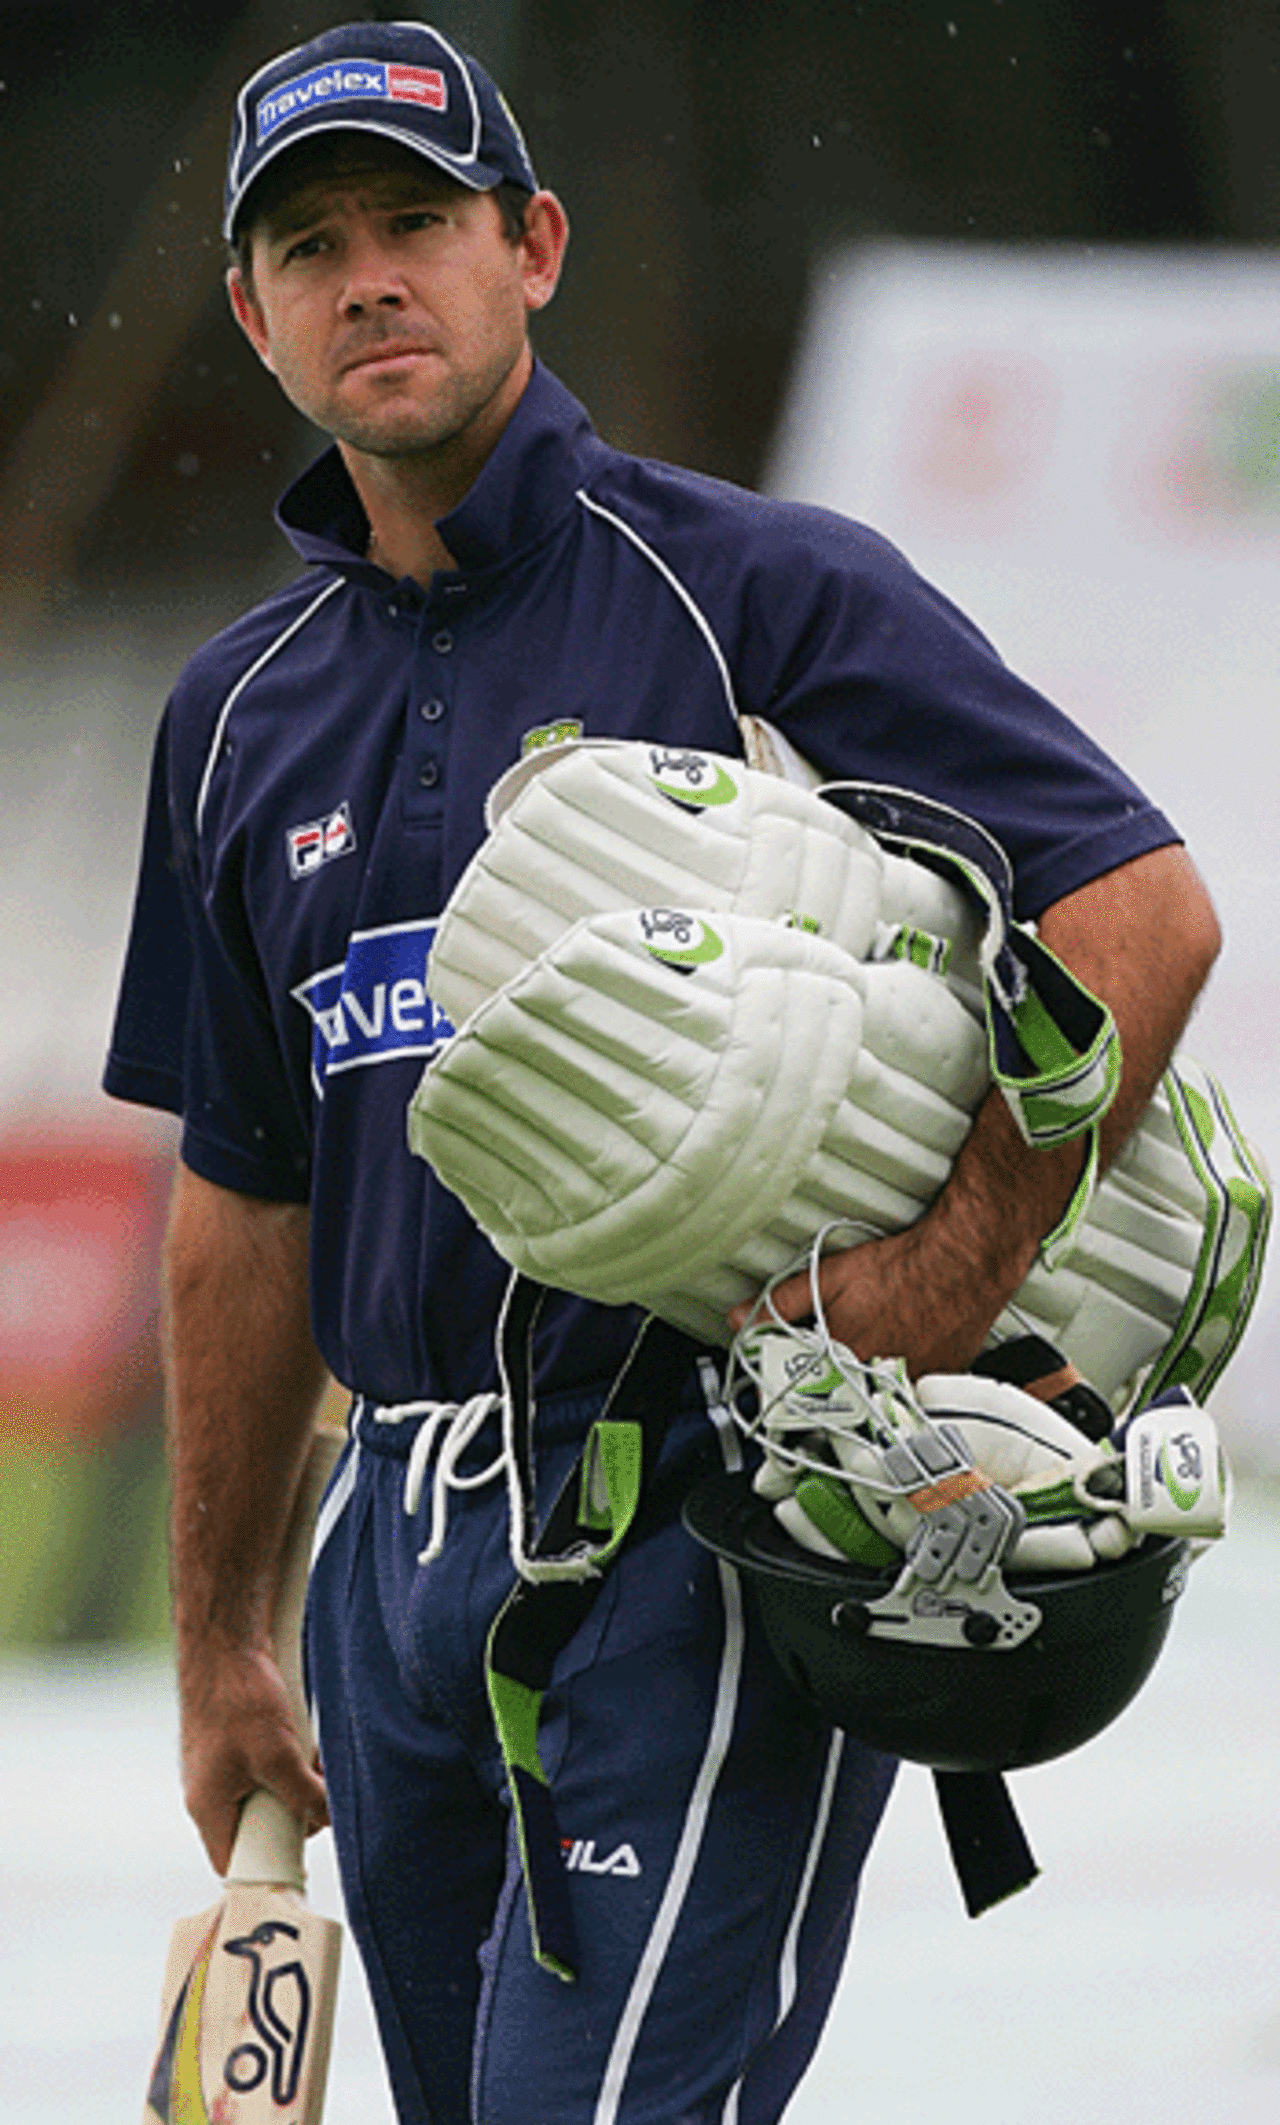 A pensive Ricky Ponting waits his turn at the nets, The Oval, London, September 6, 2005